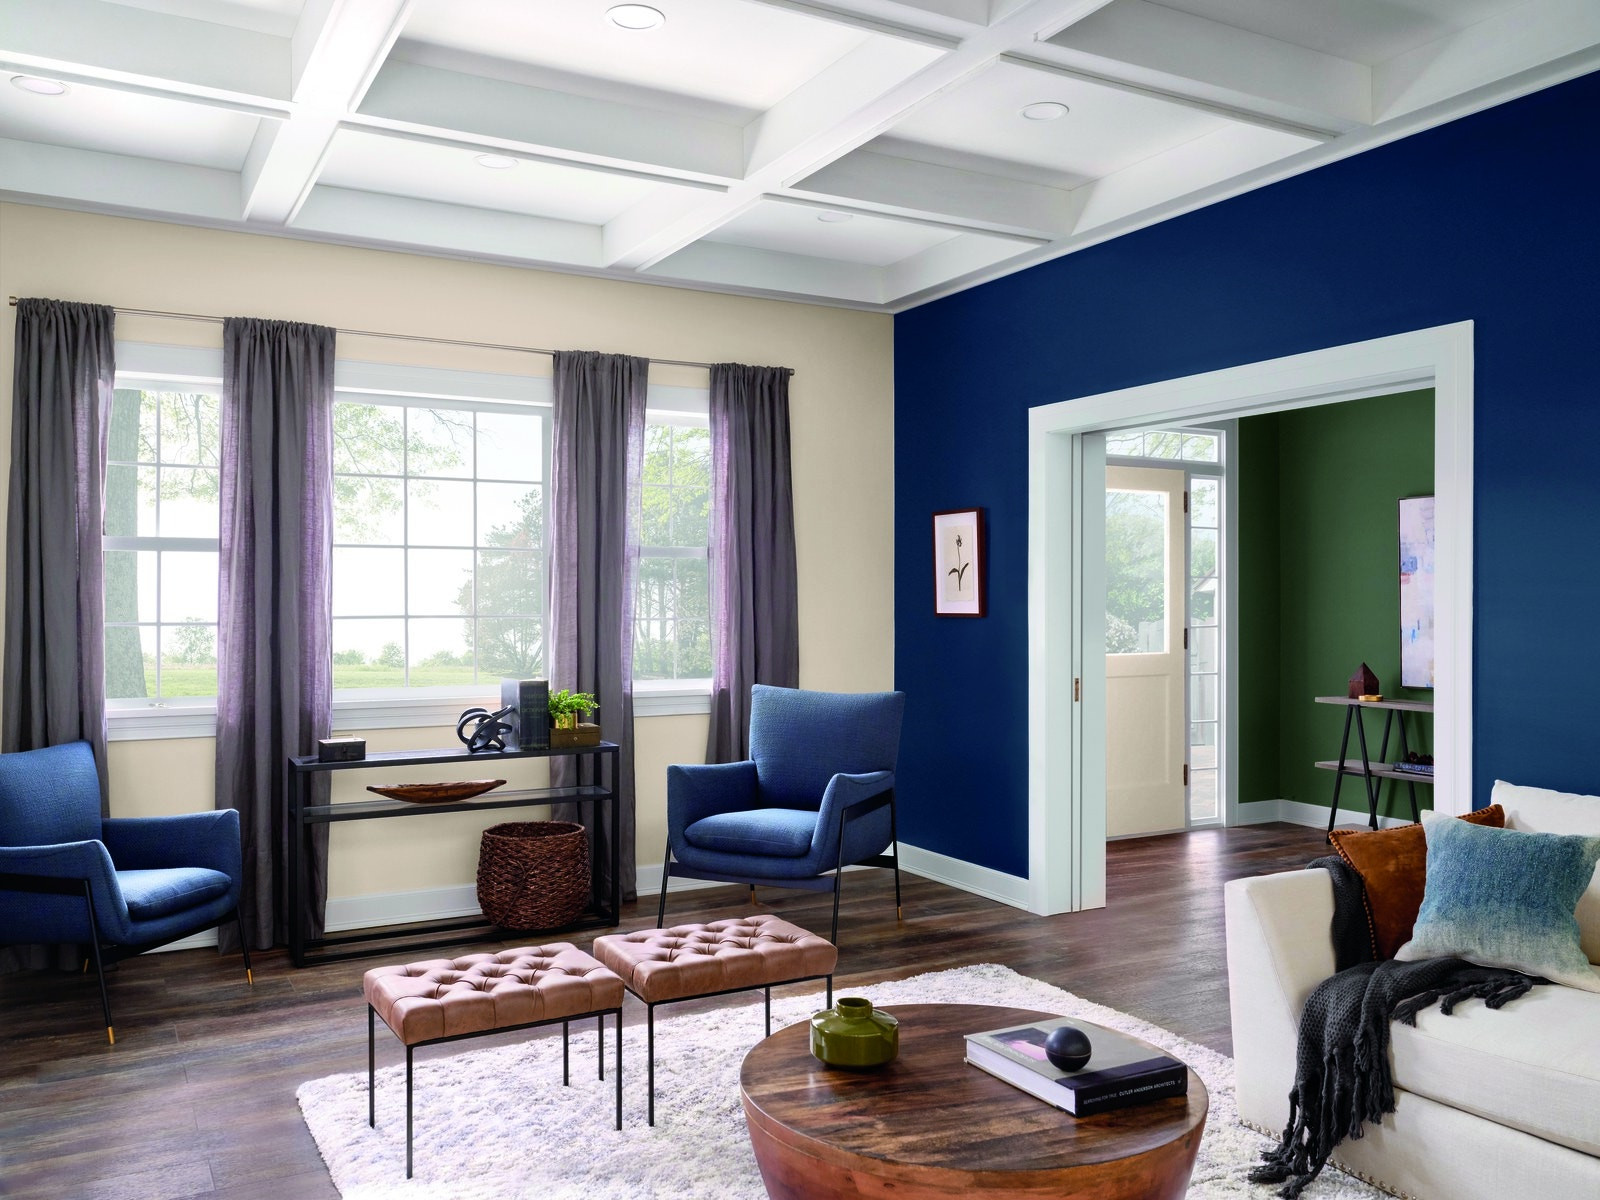 Paint Colors For Bedroom 2020
 The Color Trends We’ll Be Seeing in 2020 According to